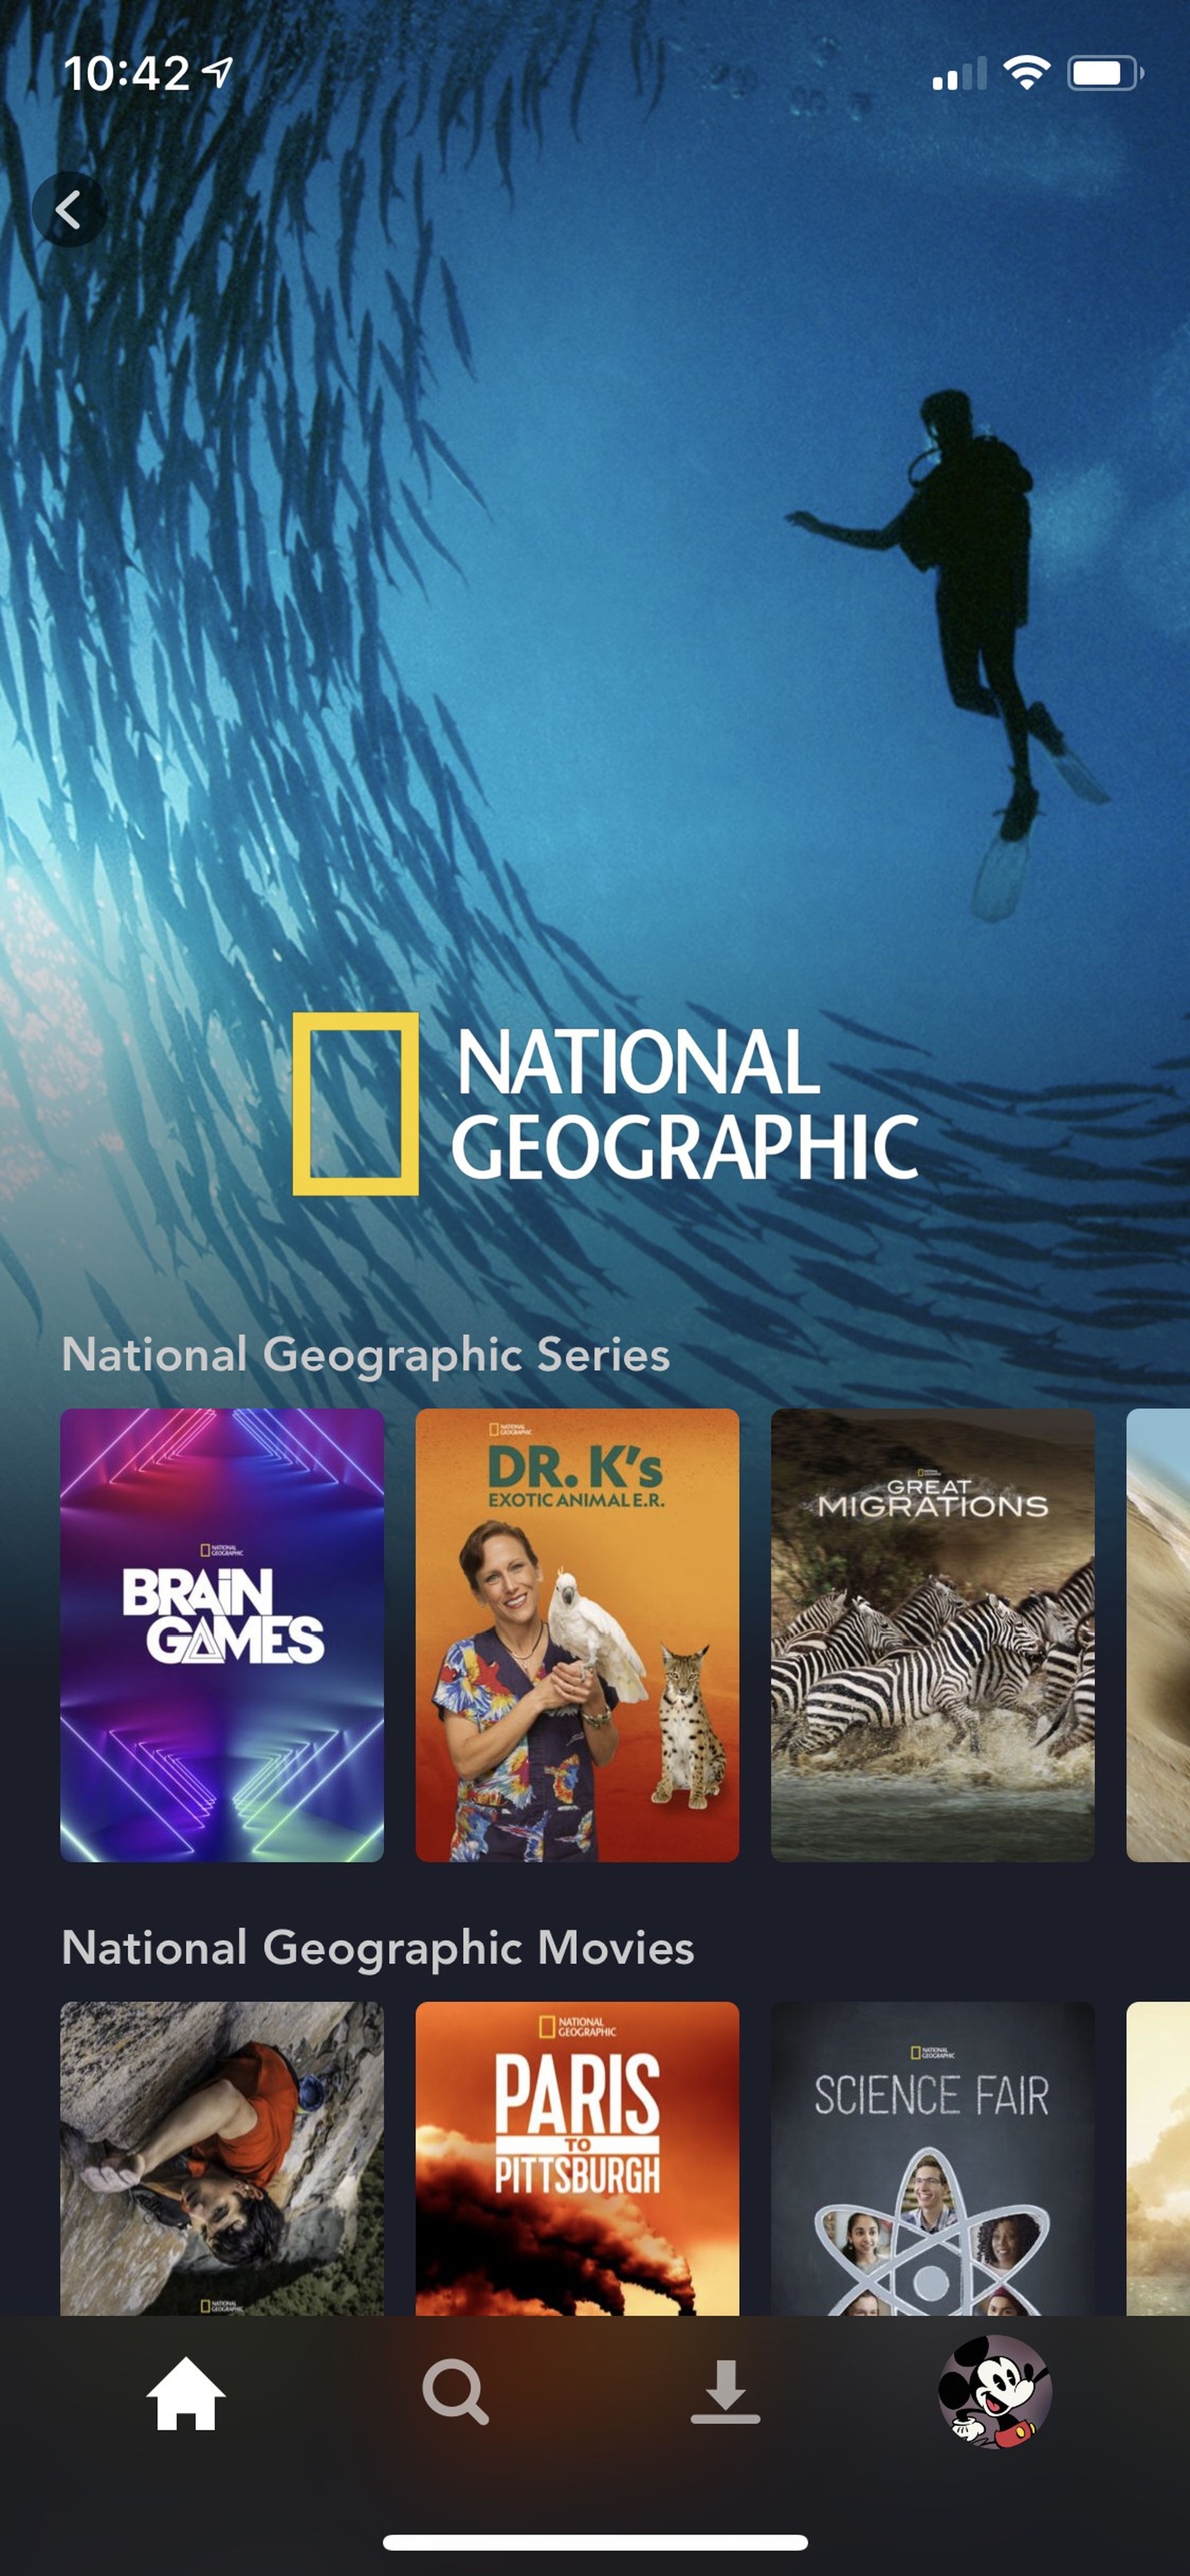 <em>The National Geographic page in the app.</em>